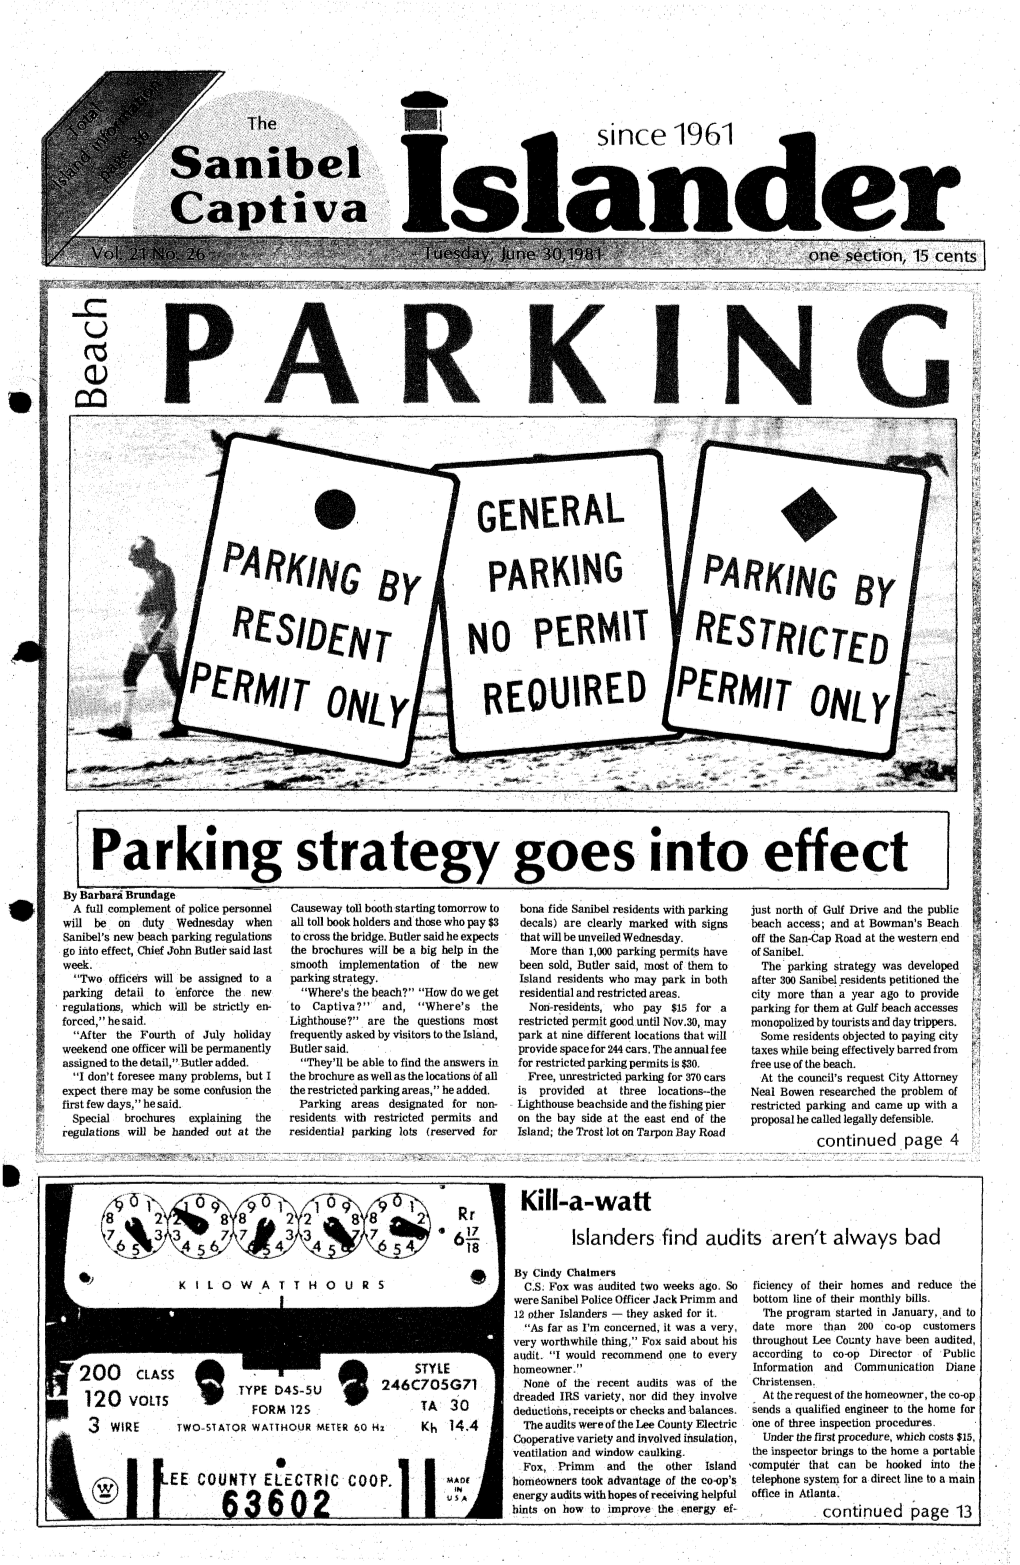 Parking Strategy Goes Into Effect